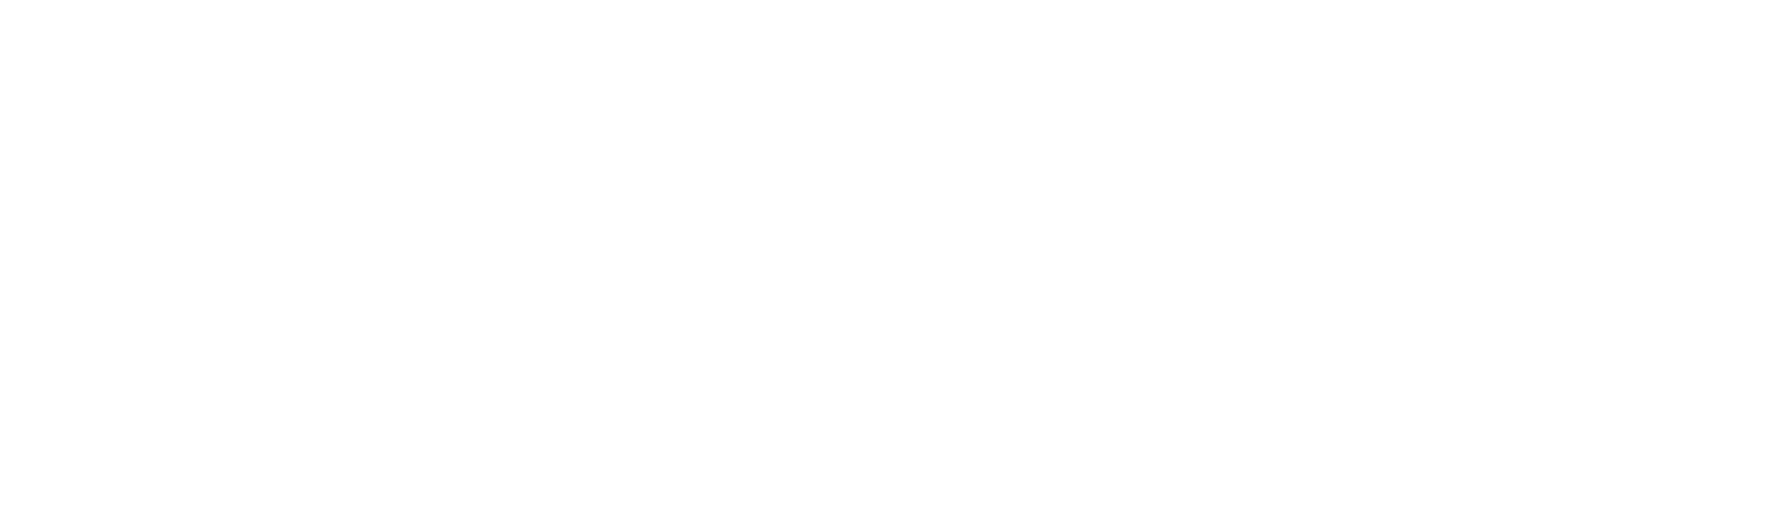 SA FIRST NATIONS VOICE TO PARLIAMENT ELECTION